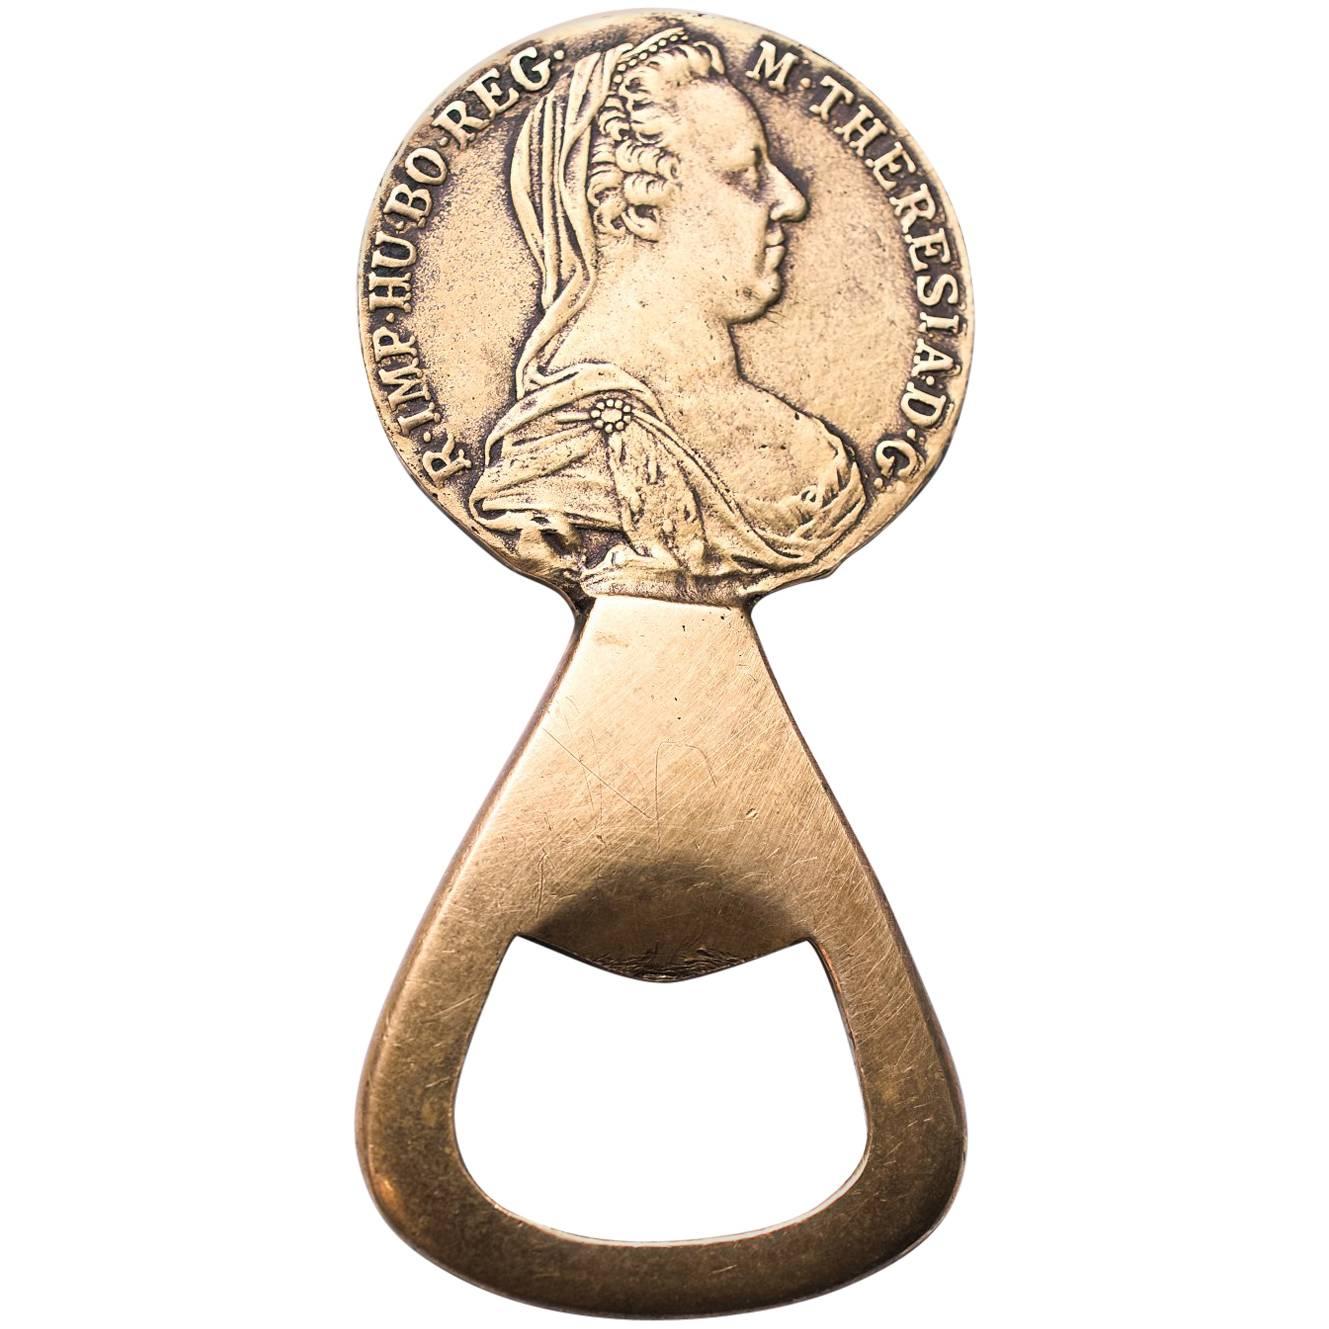 Auböck Bottle Opener Shows Maria Theresia